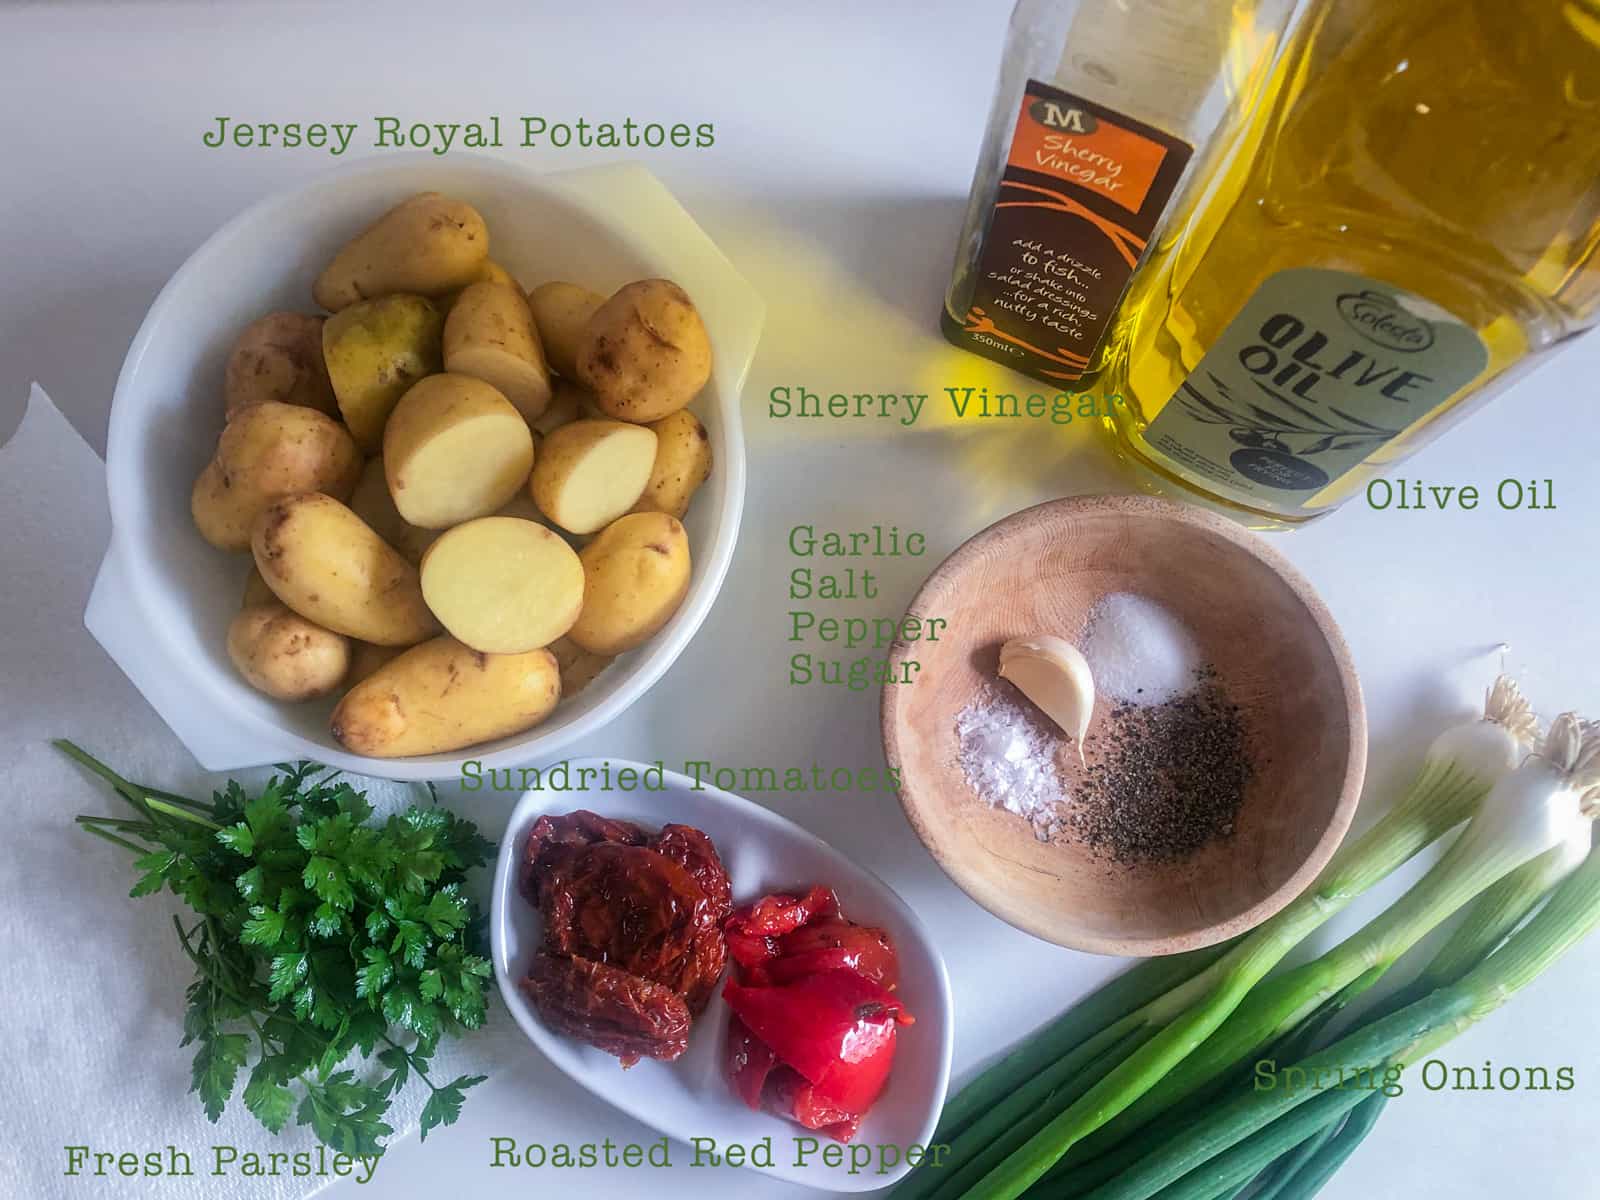 Ingredients laid out and labelled for a vegan potato salad.